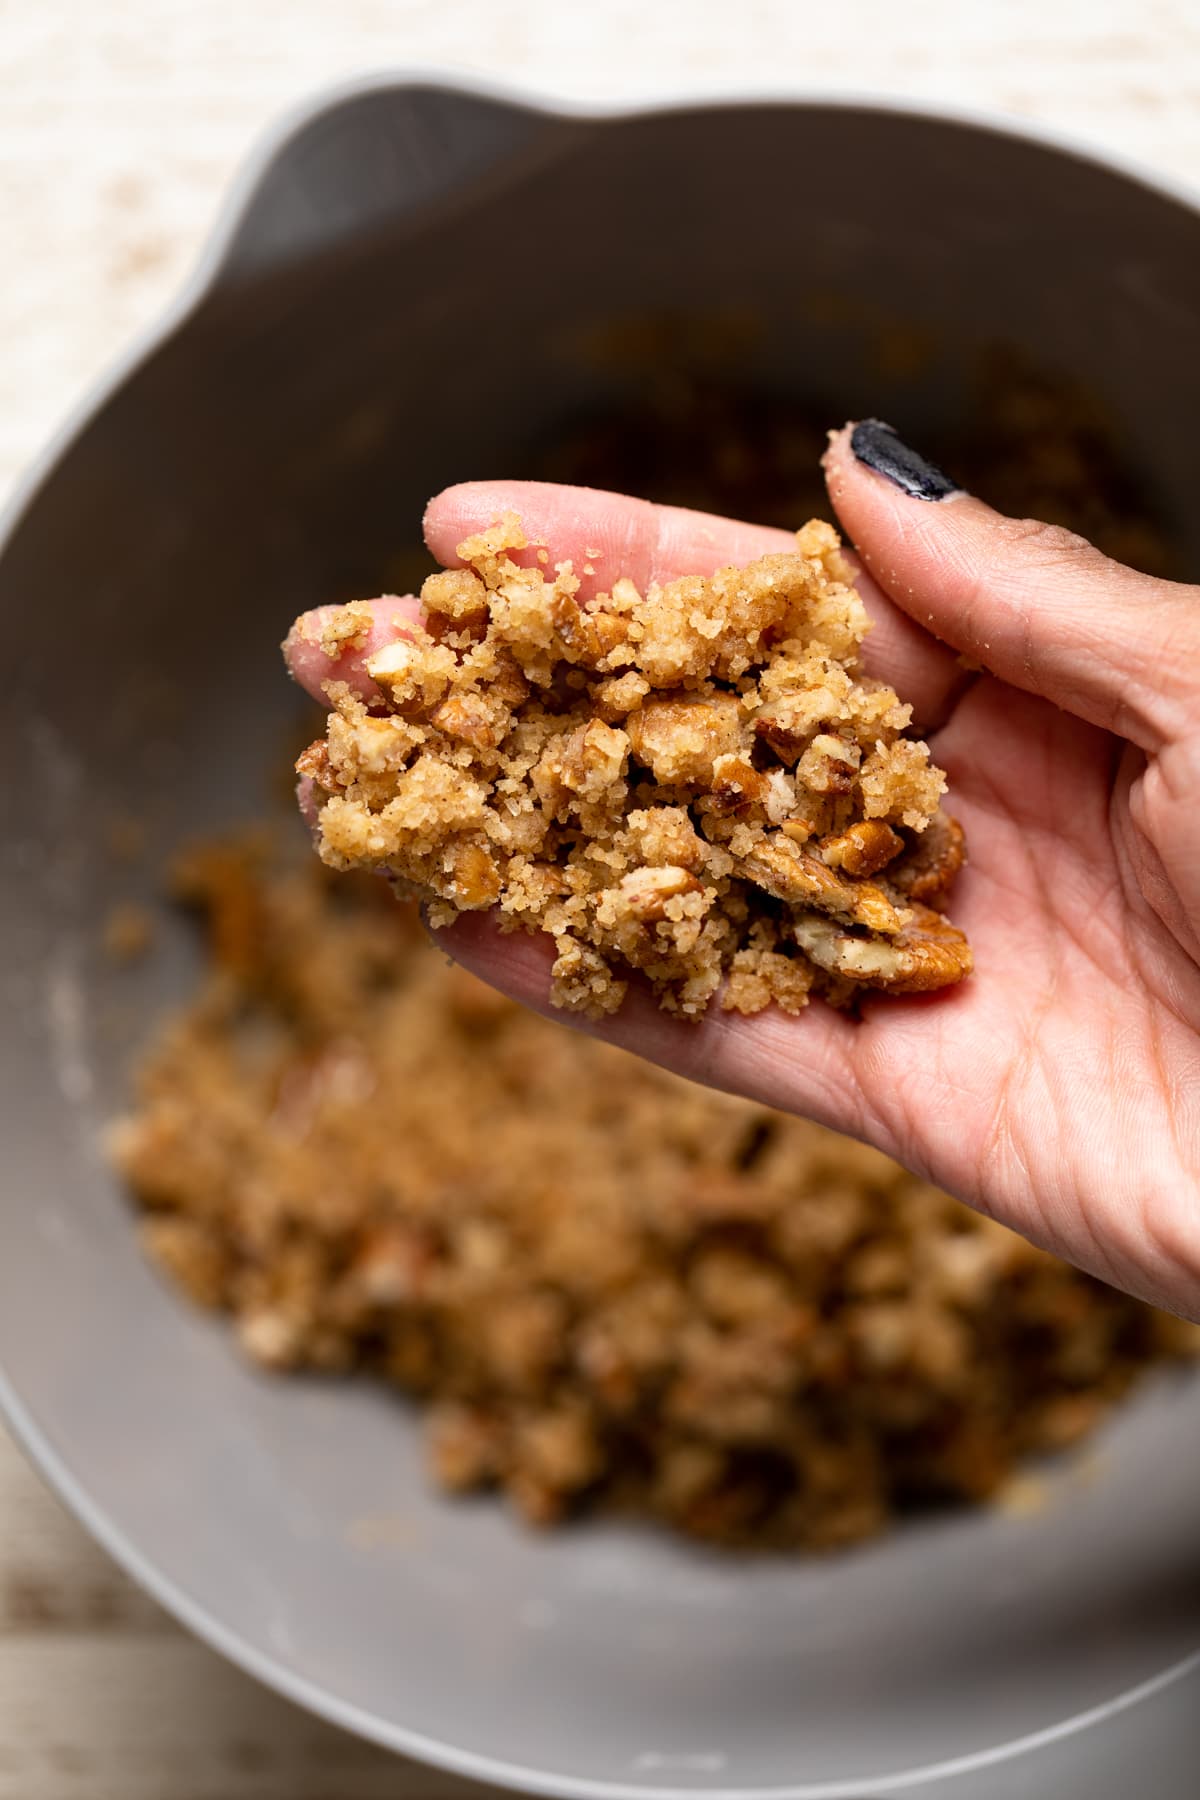 Hand holding crumble topping